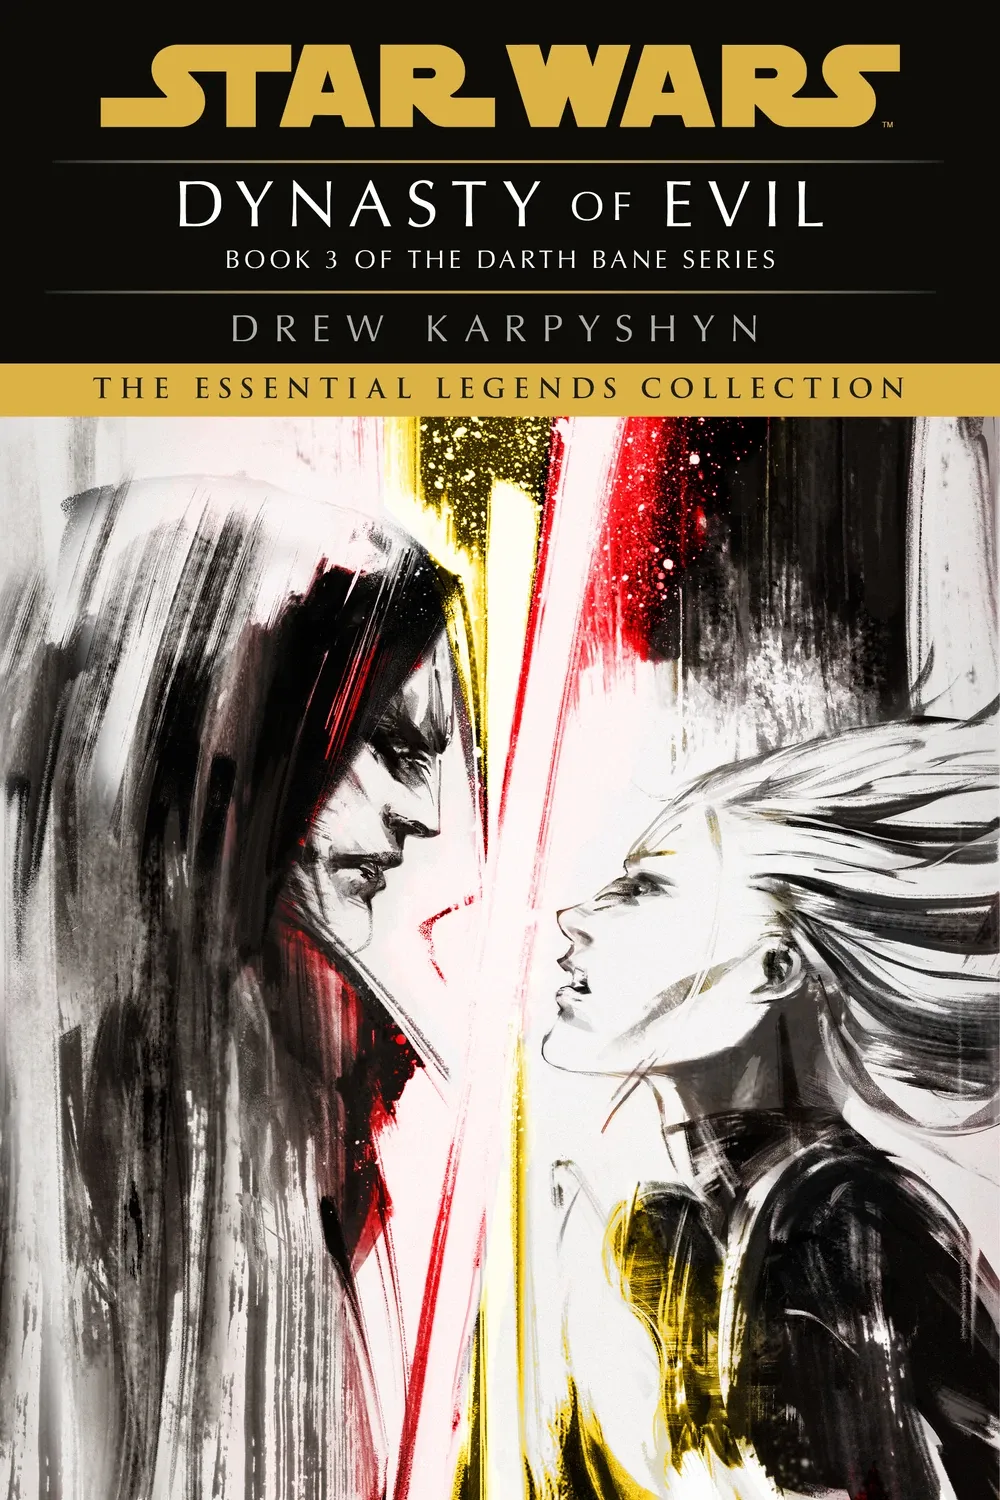 Book Review | The Darth Bane Trilogy